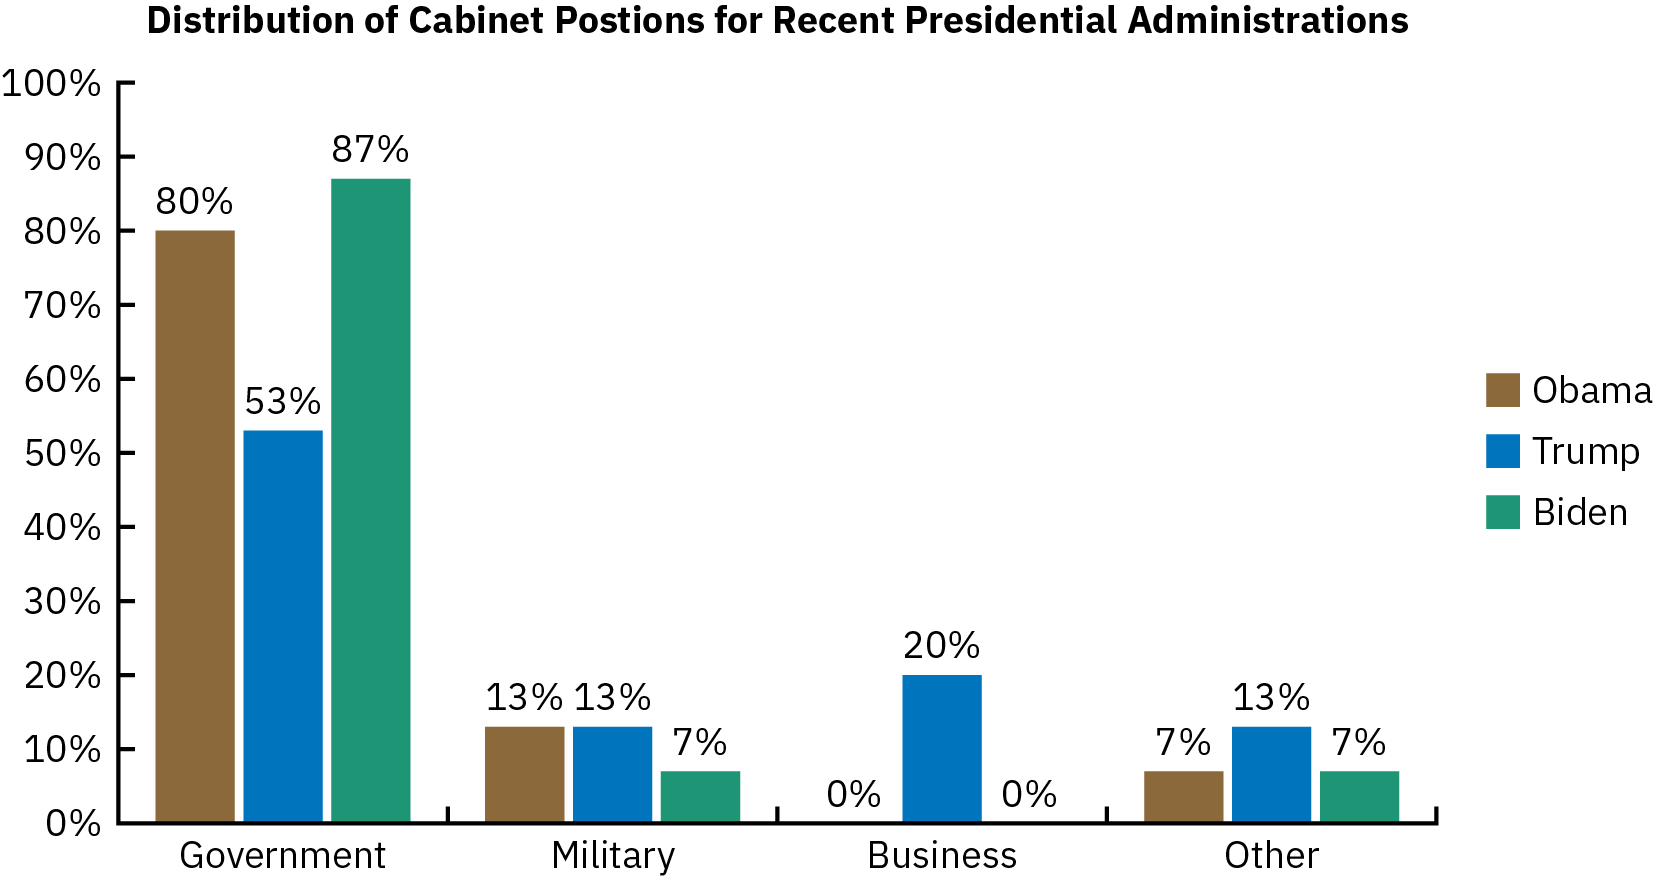 A bar graph shows the distribution of cabinet secretaries based on their previous employment background. In the Obama administration, 80% of cabinet secretaries had a government background, 13% had a military background, none had a business background, and 7% had “other” background. In the Trump administration, 53% of cabinet secretaries had a government background, 13% had a military background, 20% had a business background, and 13% had “other” background. In the Biden  administration, 87% of cabinet secretaries had a government background, 7% had a military background, none had a business background, and 7% had “other” background.